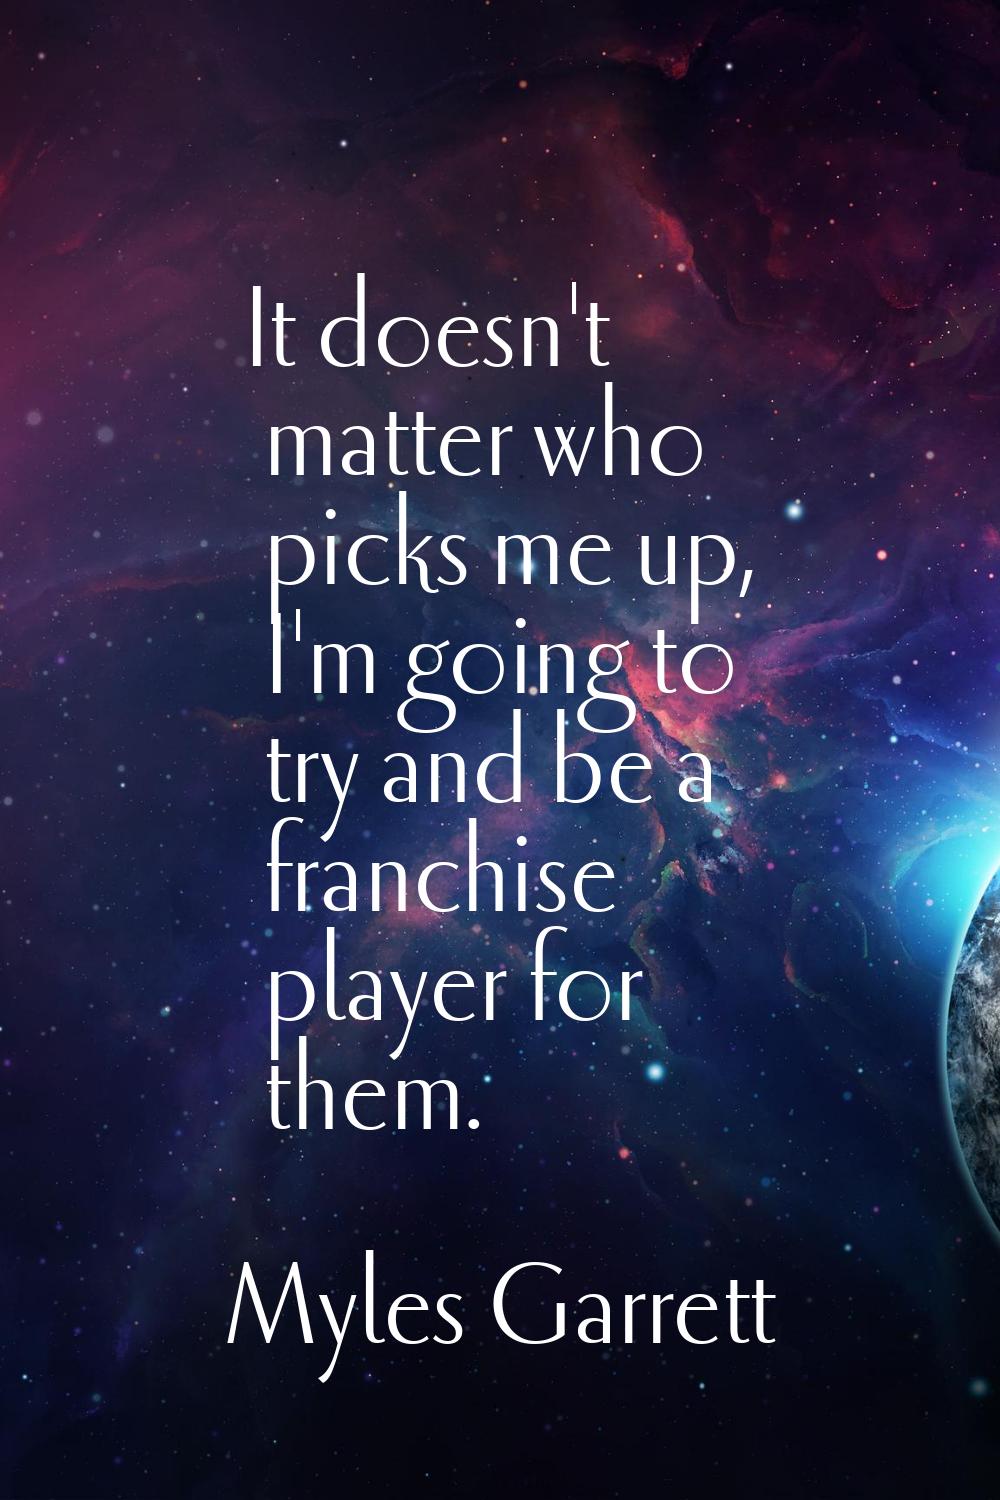 It doesn't matter who picks me up, I'm going to try and be a franchise player for them.